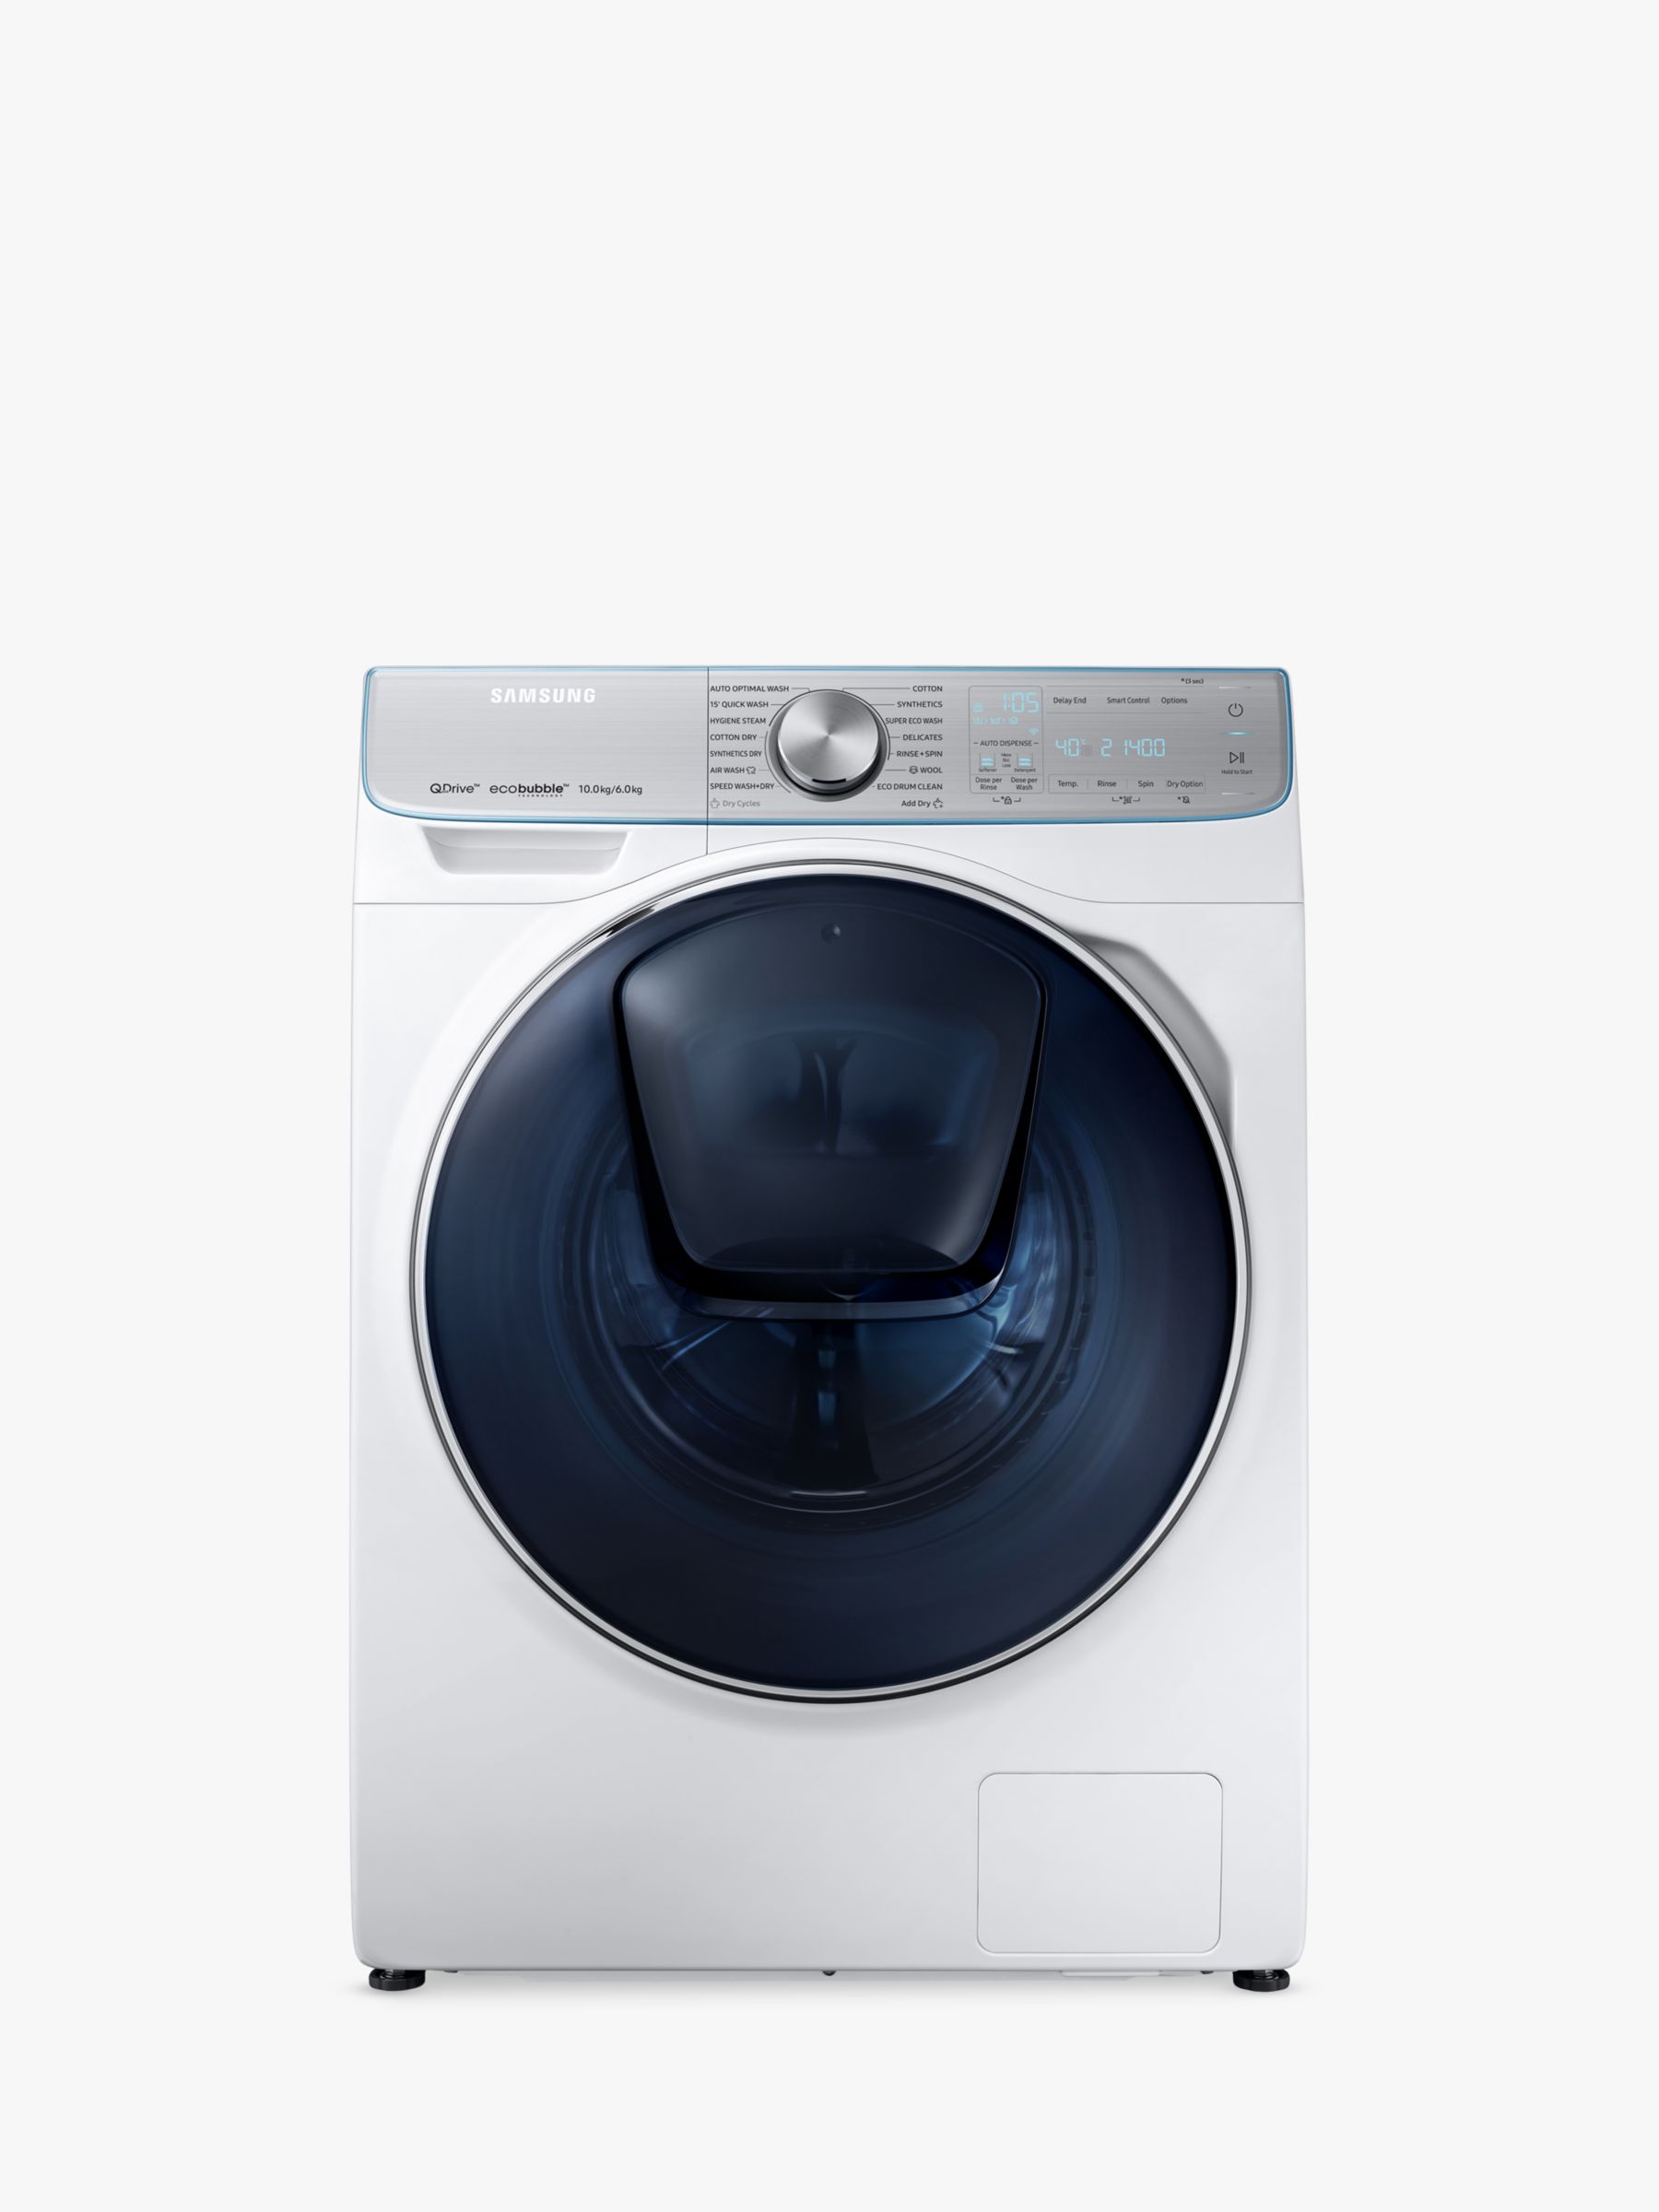 Samsung QuickDrive WD10N84GNOA/EU Freestanding Washer Dryer with AddWash, 10kg Wash/6kg Dry Load, A Energy Rating, 1400rpm Spin, White